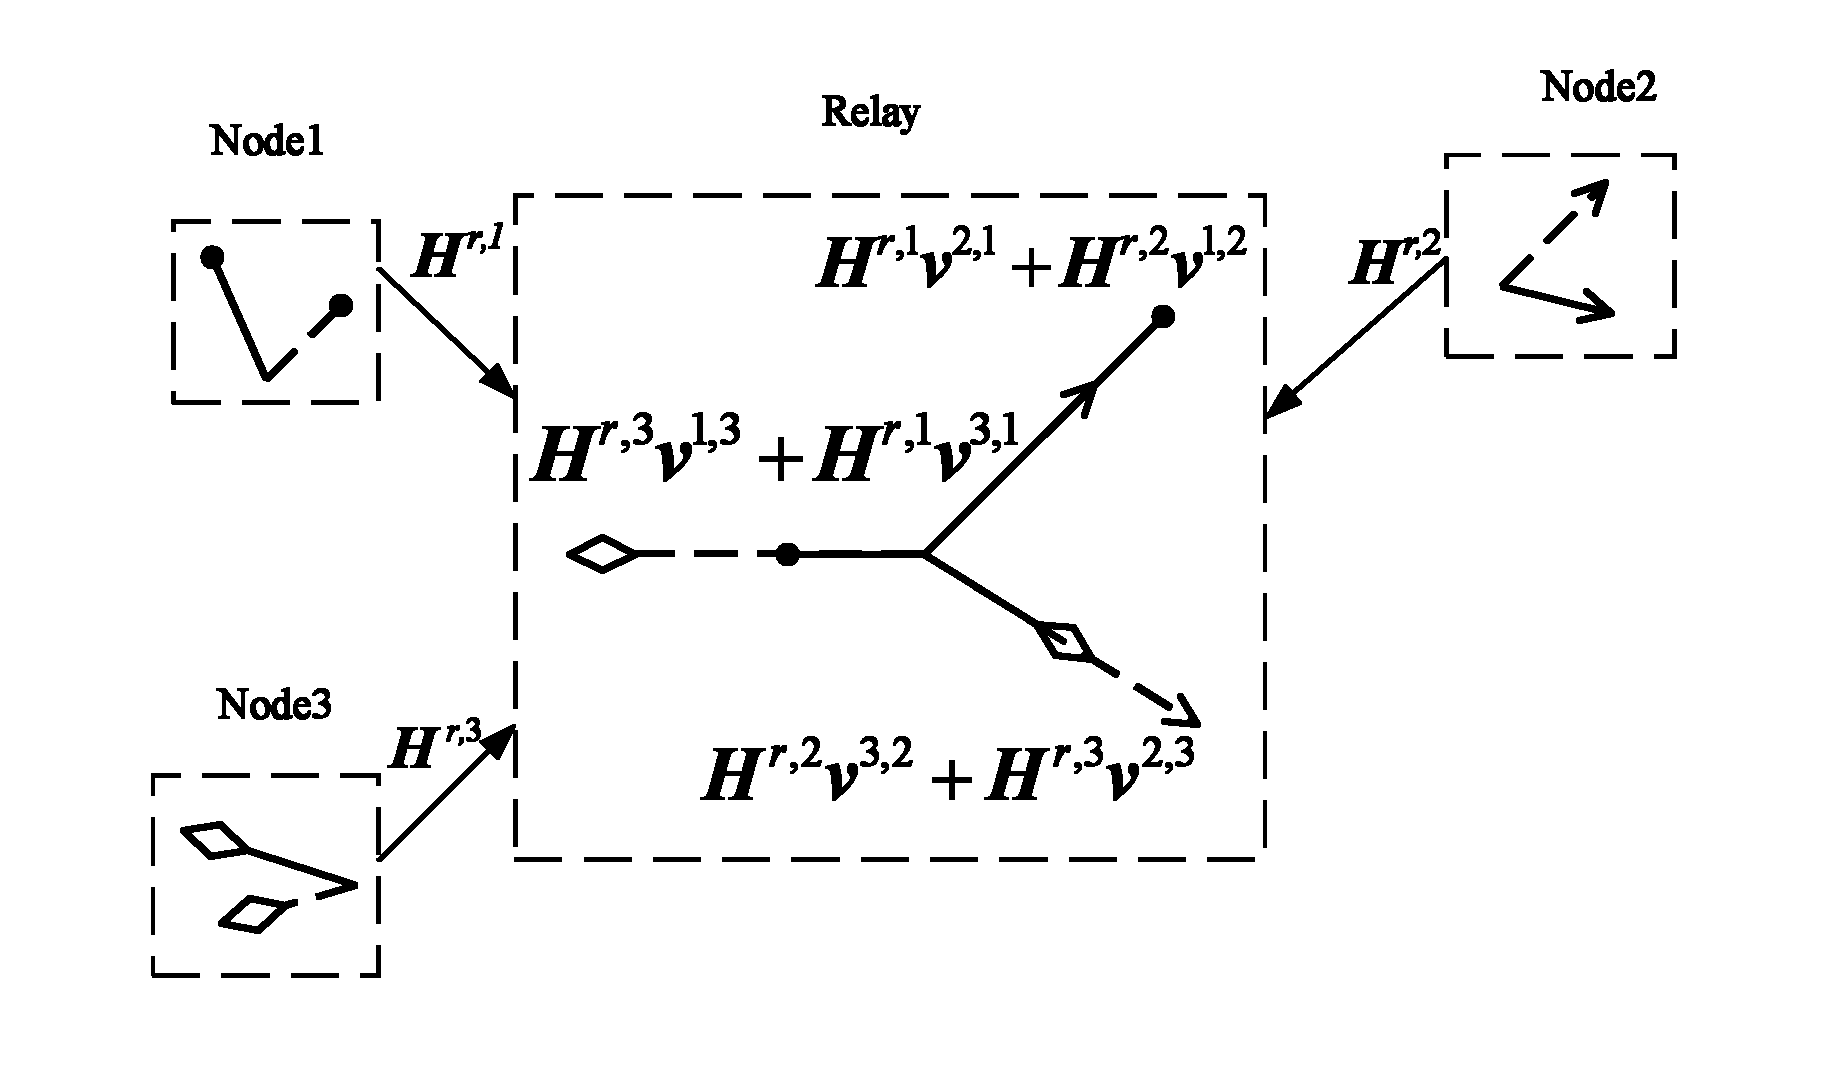 Signal-space-alignment-based common-channel multi-user interference suppression method